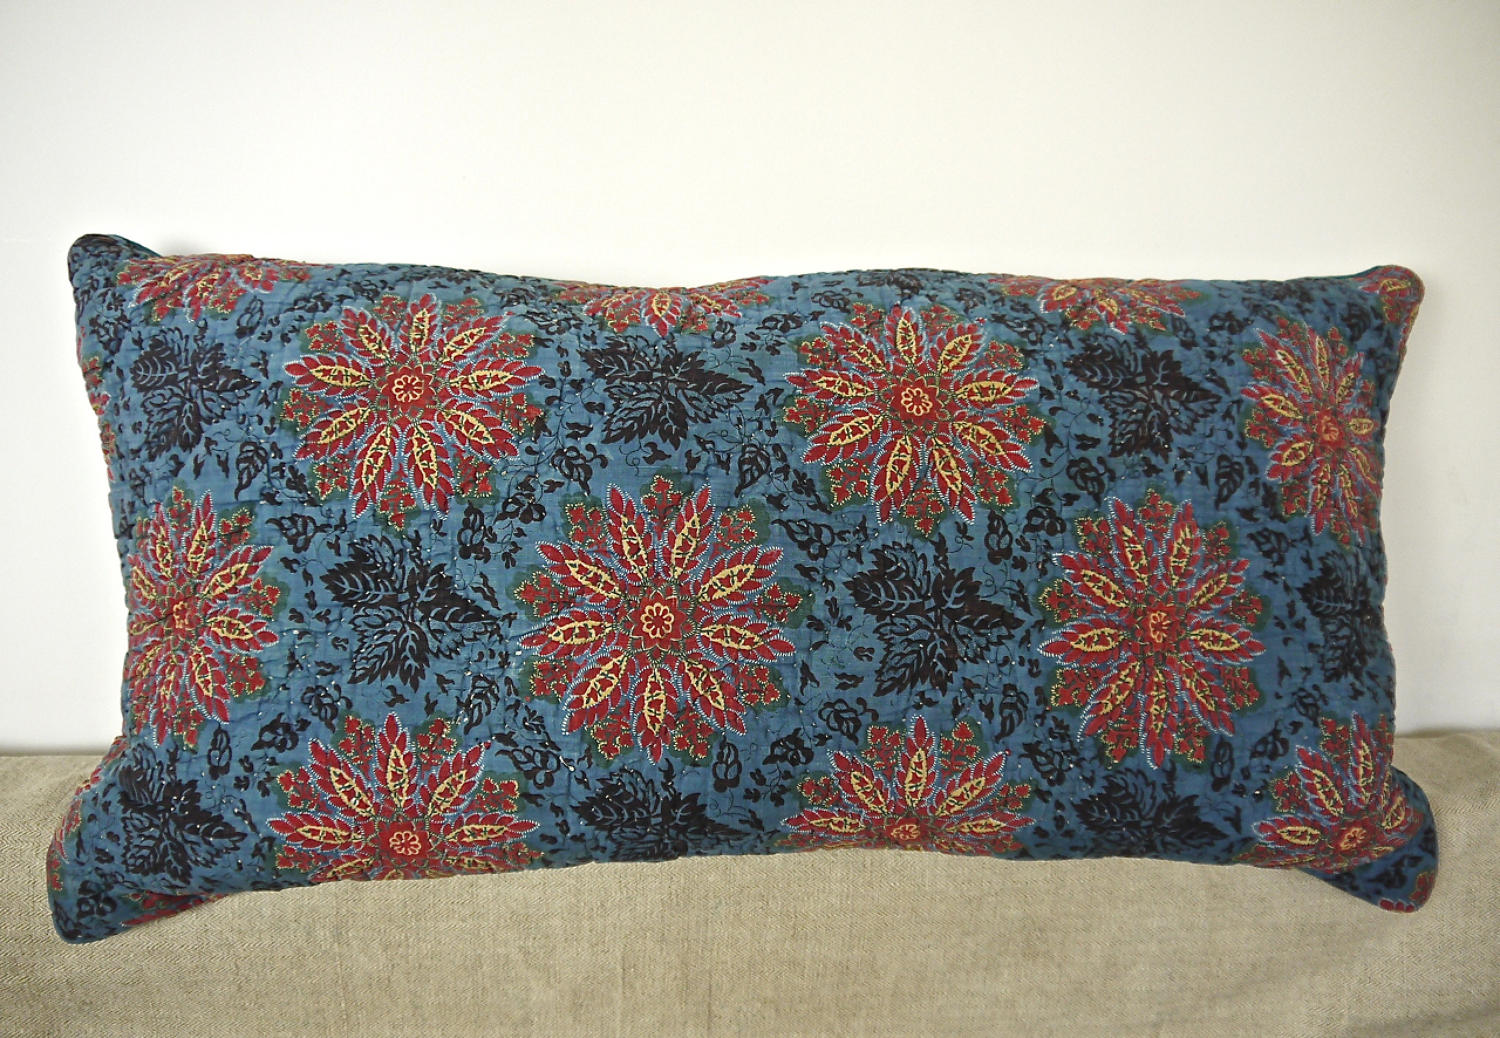 Early 19th century French blockprinted  cushion